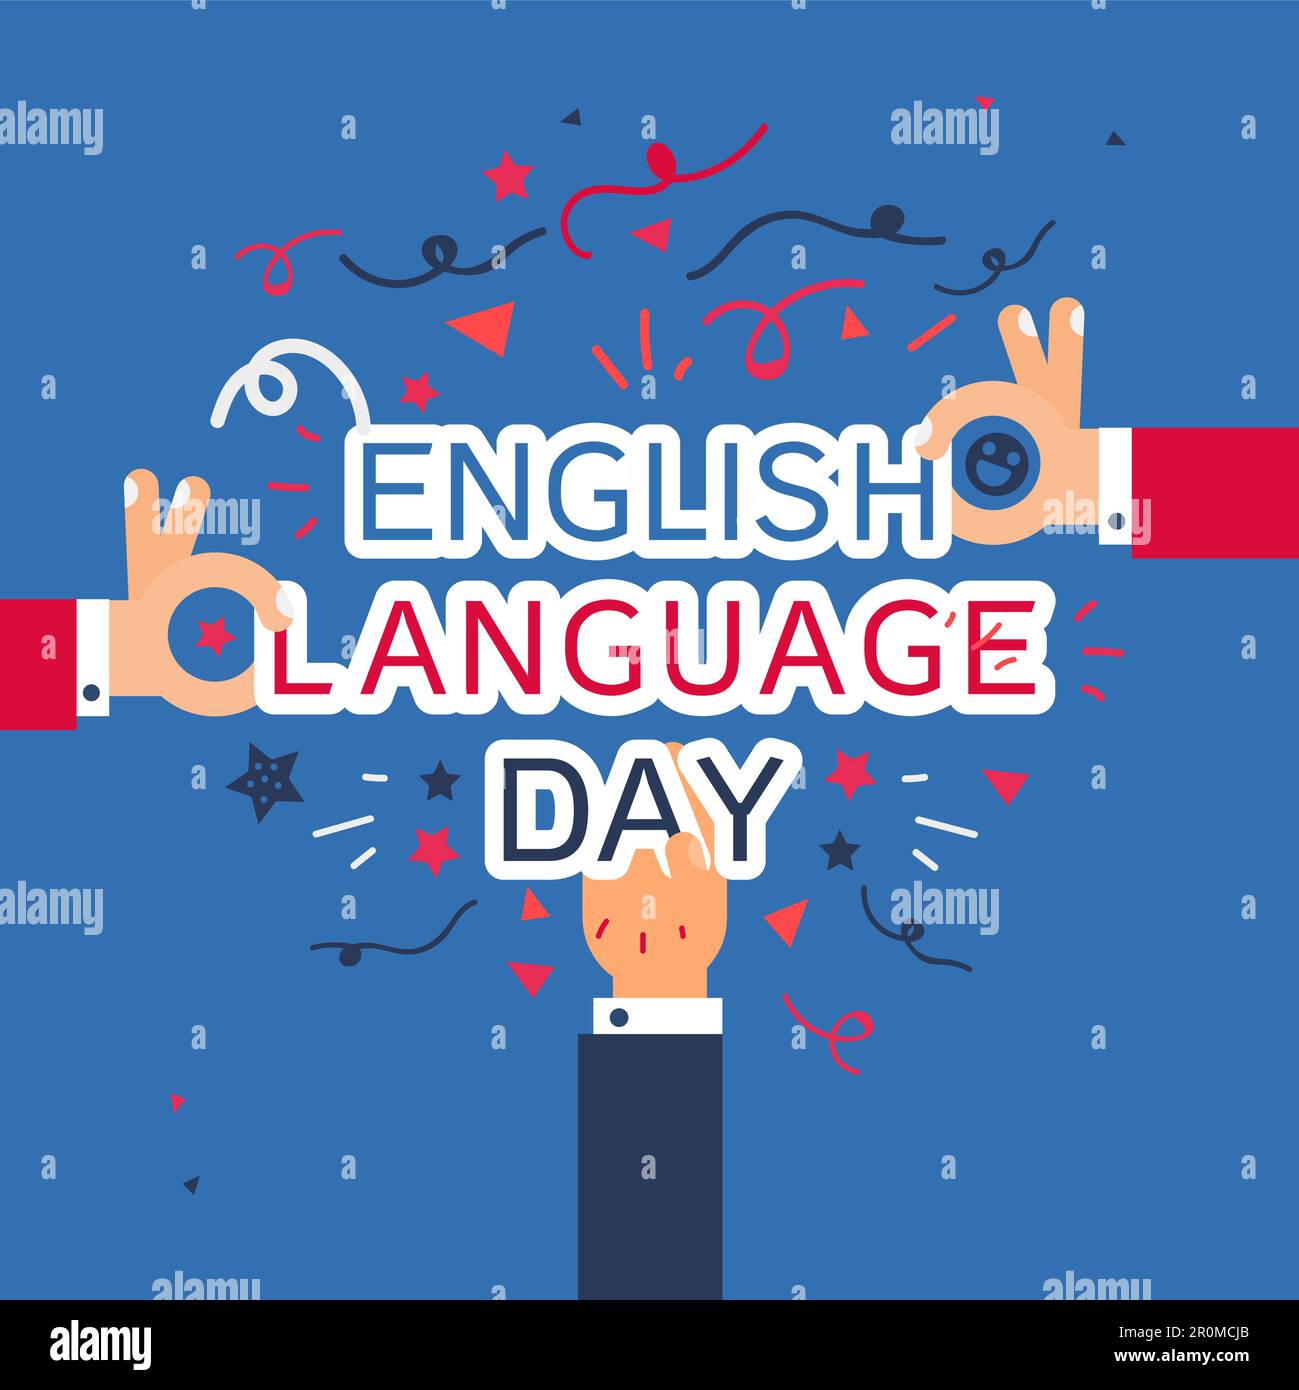 English Language Day Banner With Humans Hands. Vector Stock Vector